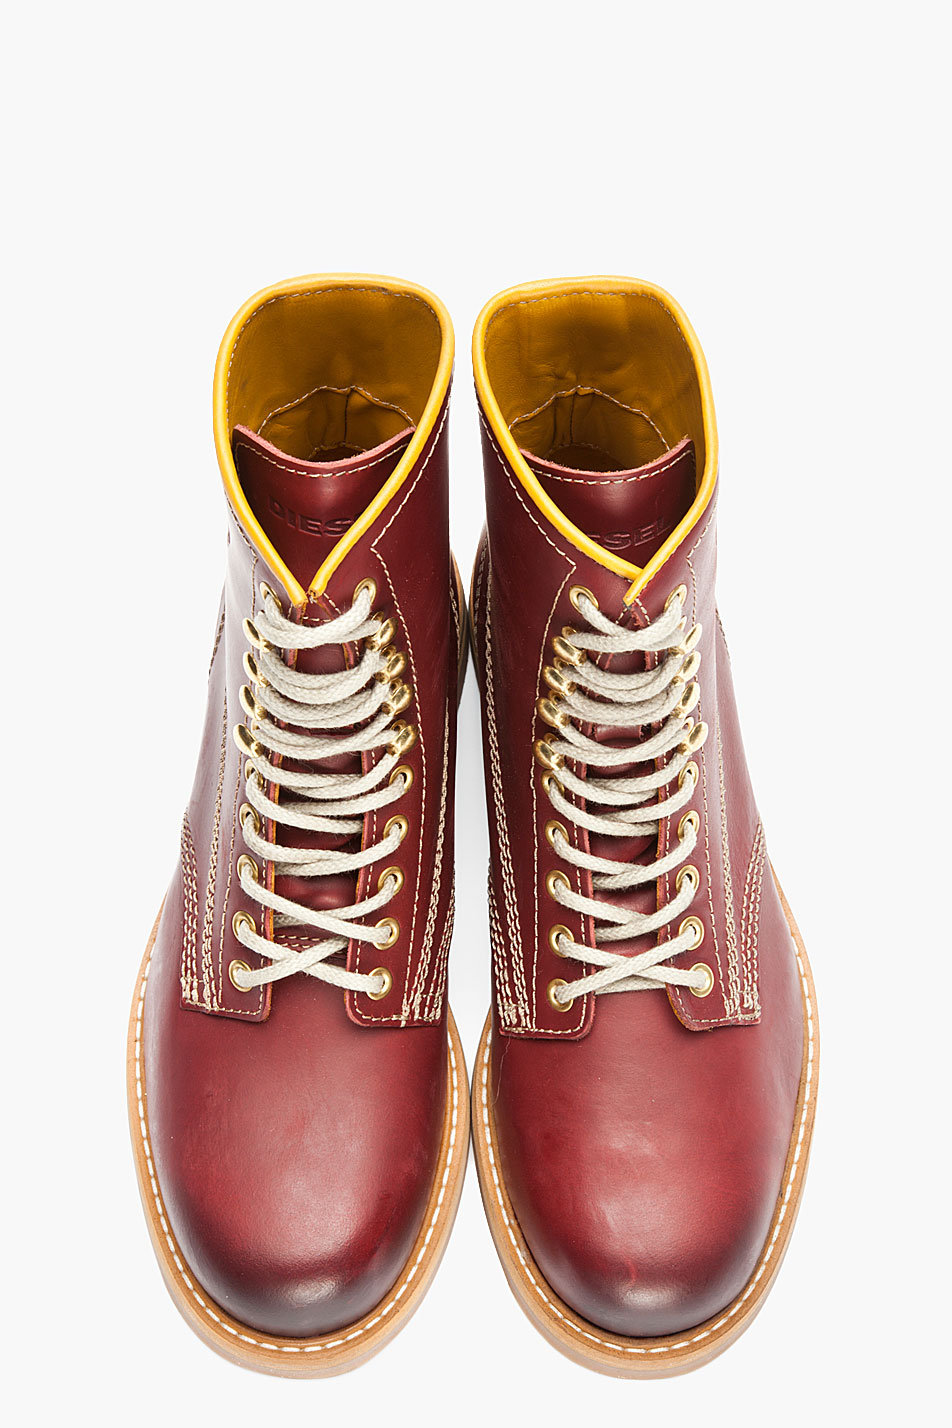 DIESEL Burgundy Leather Skillo Boots in Red for Men - Lyst